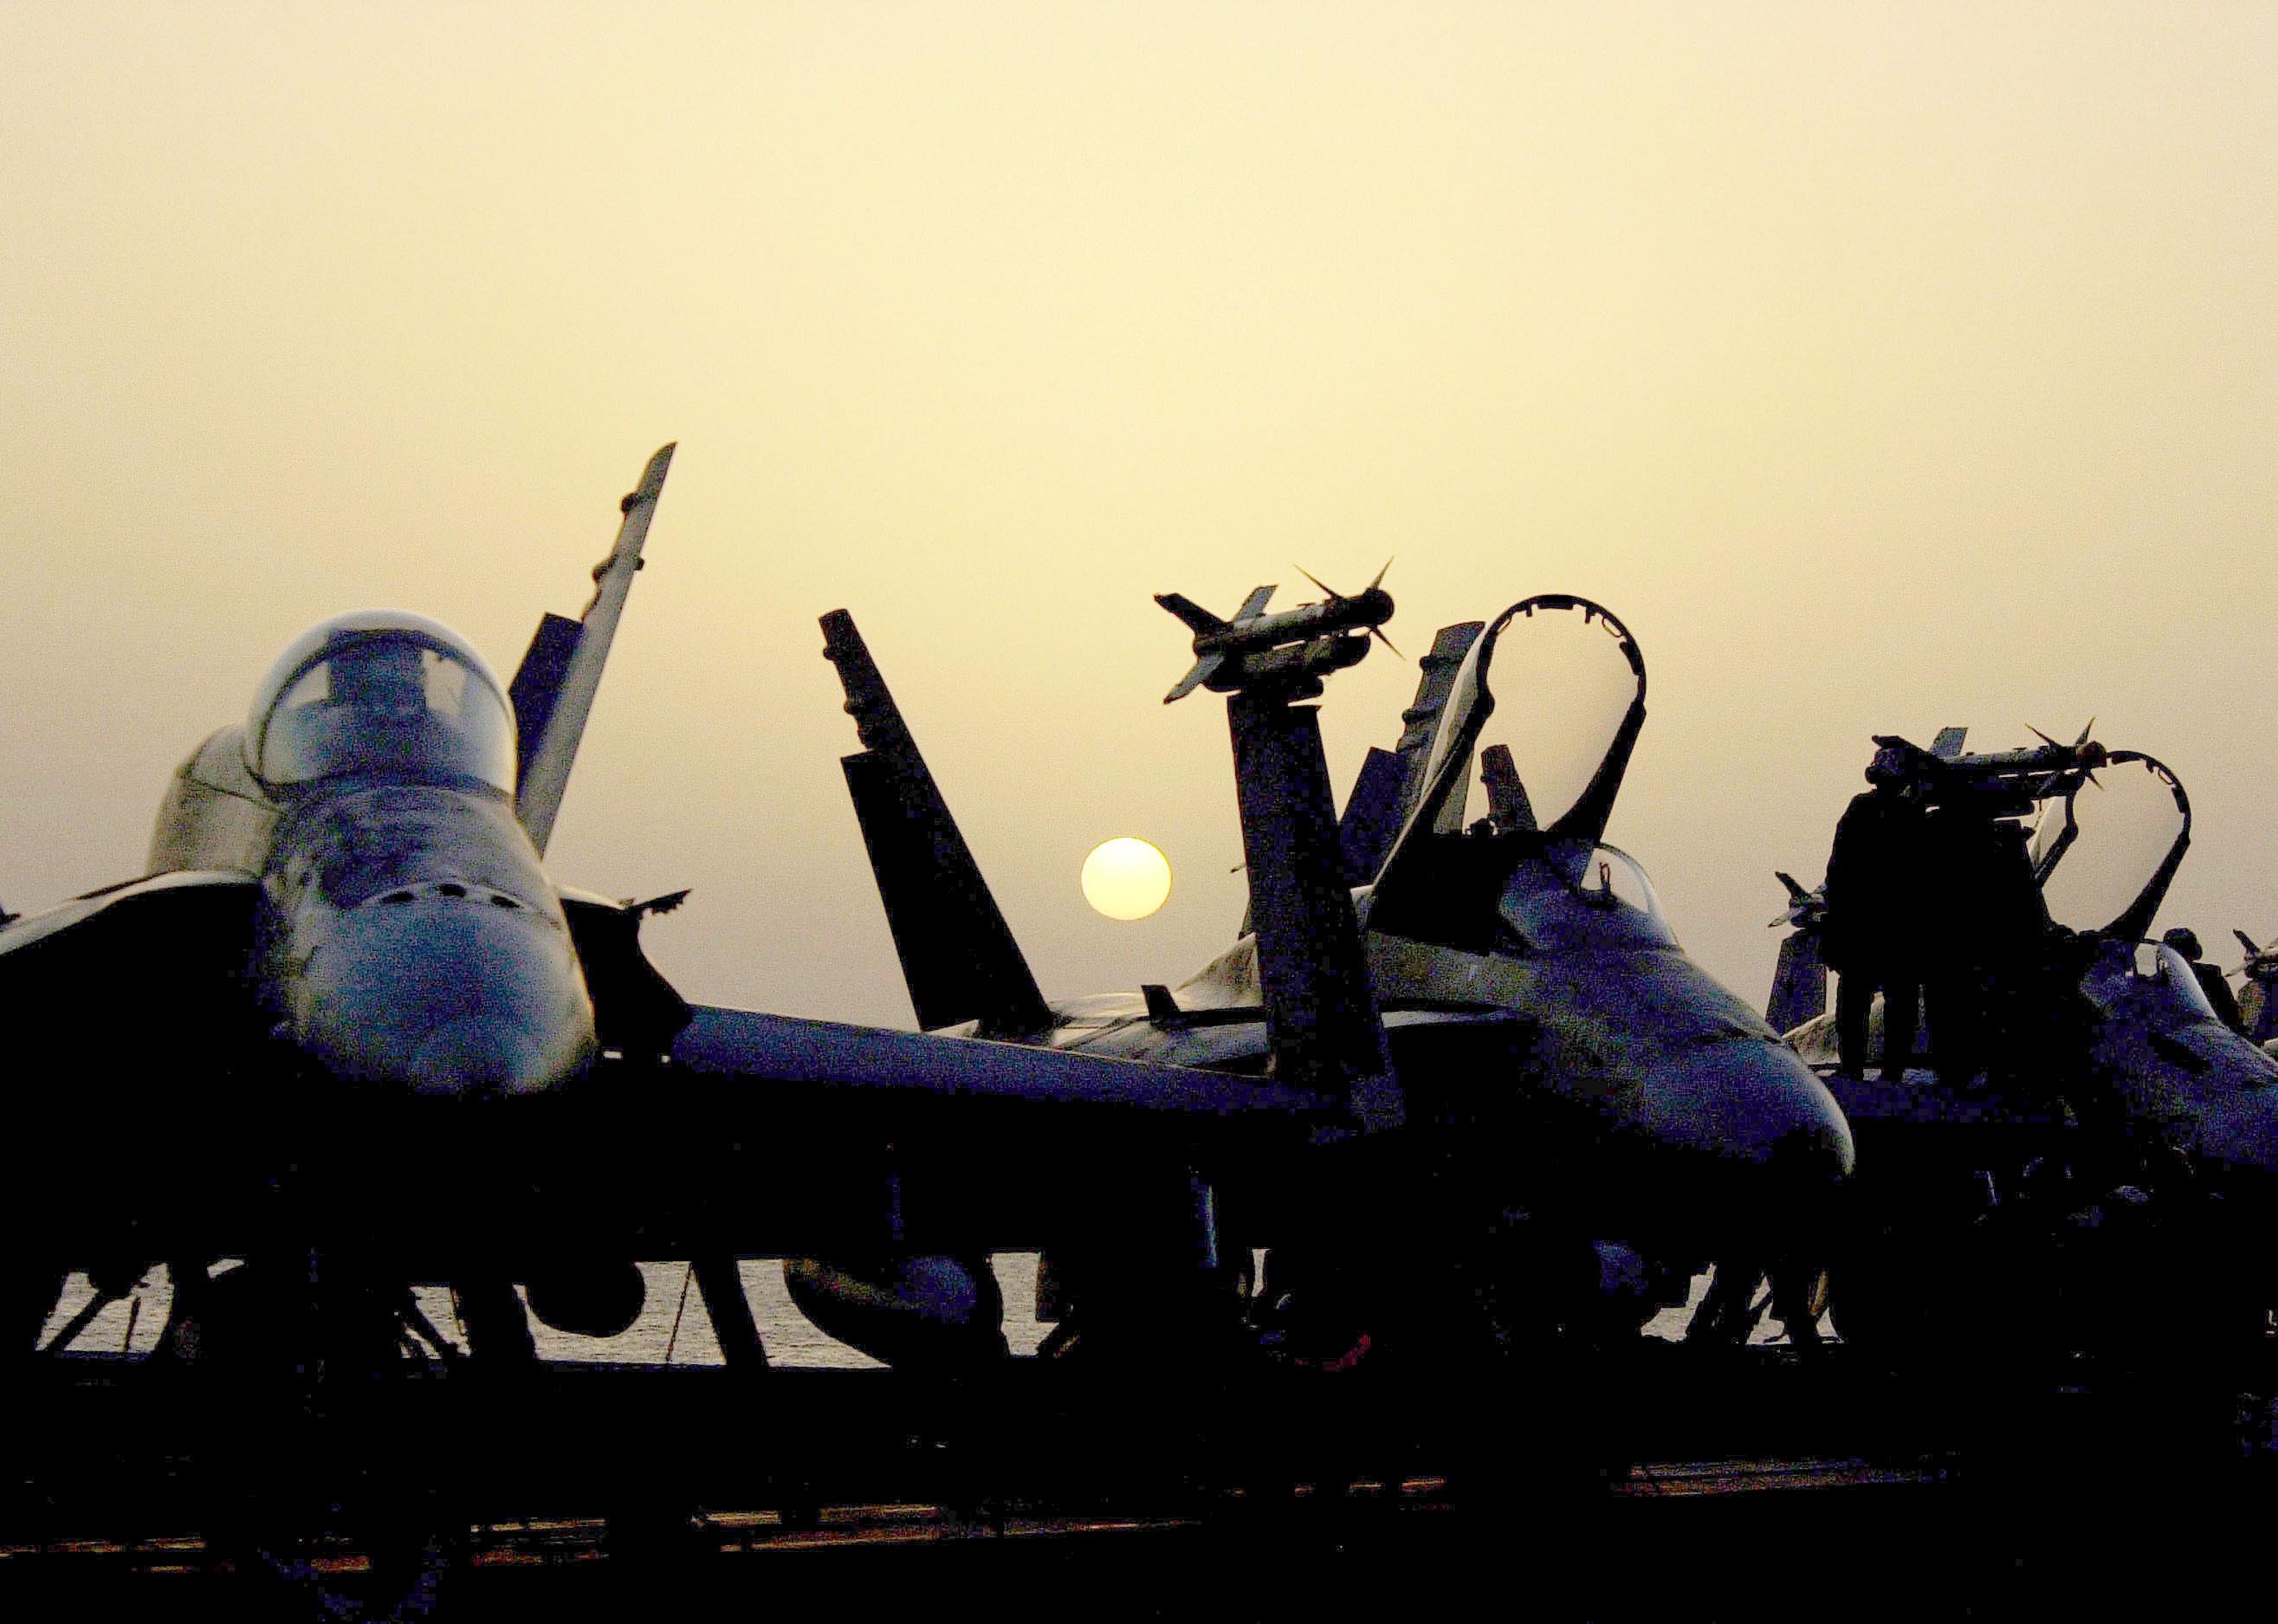 US Navy F/A-18 Hornet jets sitting on the flight deck waiting to be loaded.